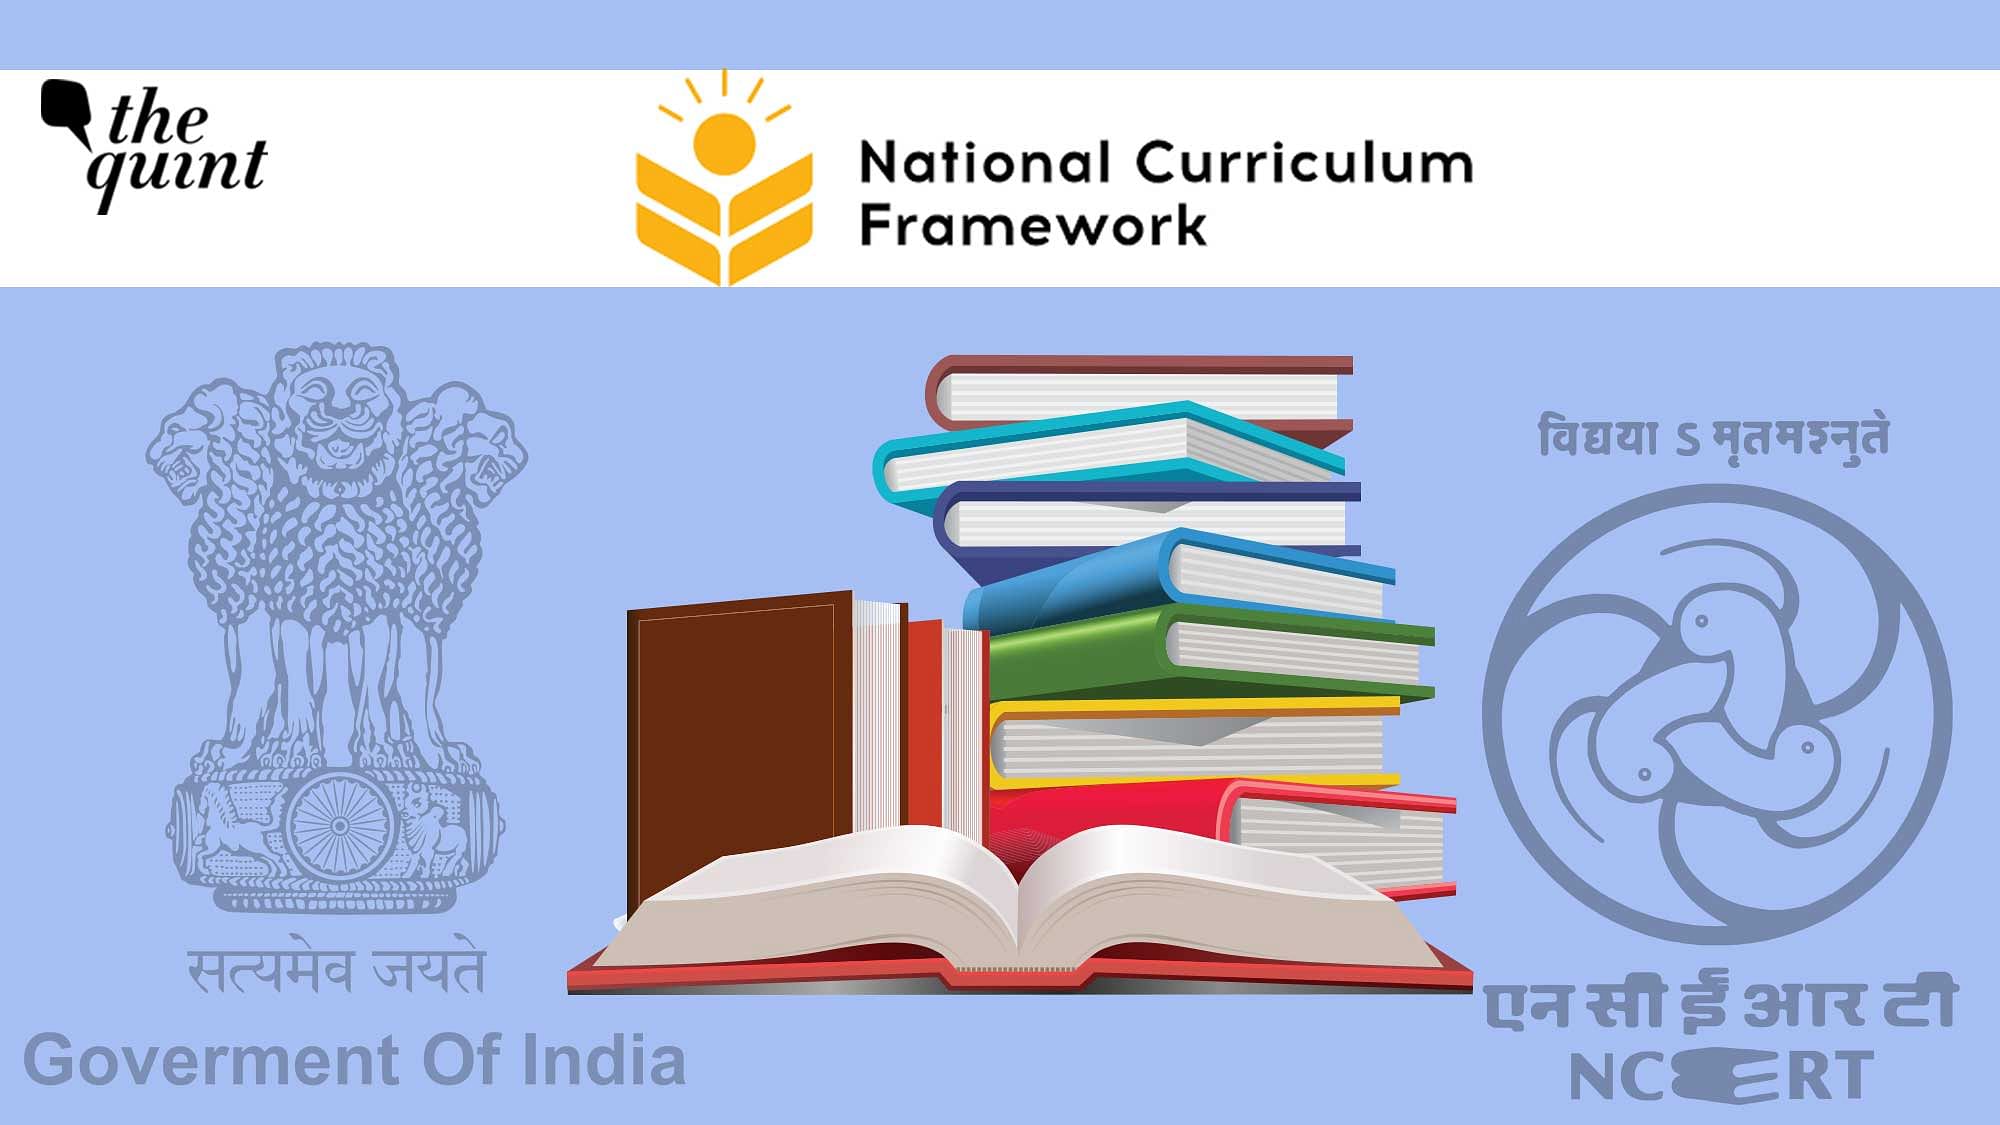 <div class="paragraphs"><p>The <a href="https://www.thequint.com/topic/ministry-of-education">Ministry of Education</a> has launched a survey that will allow public consultation regarding revisions to the National Curriculum Framework, which will be the foundation for the new <a href="https://www.thequint.com/topic/ncert-book">NCERT books</a>.</p></div>